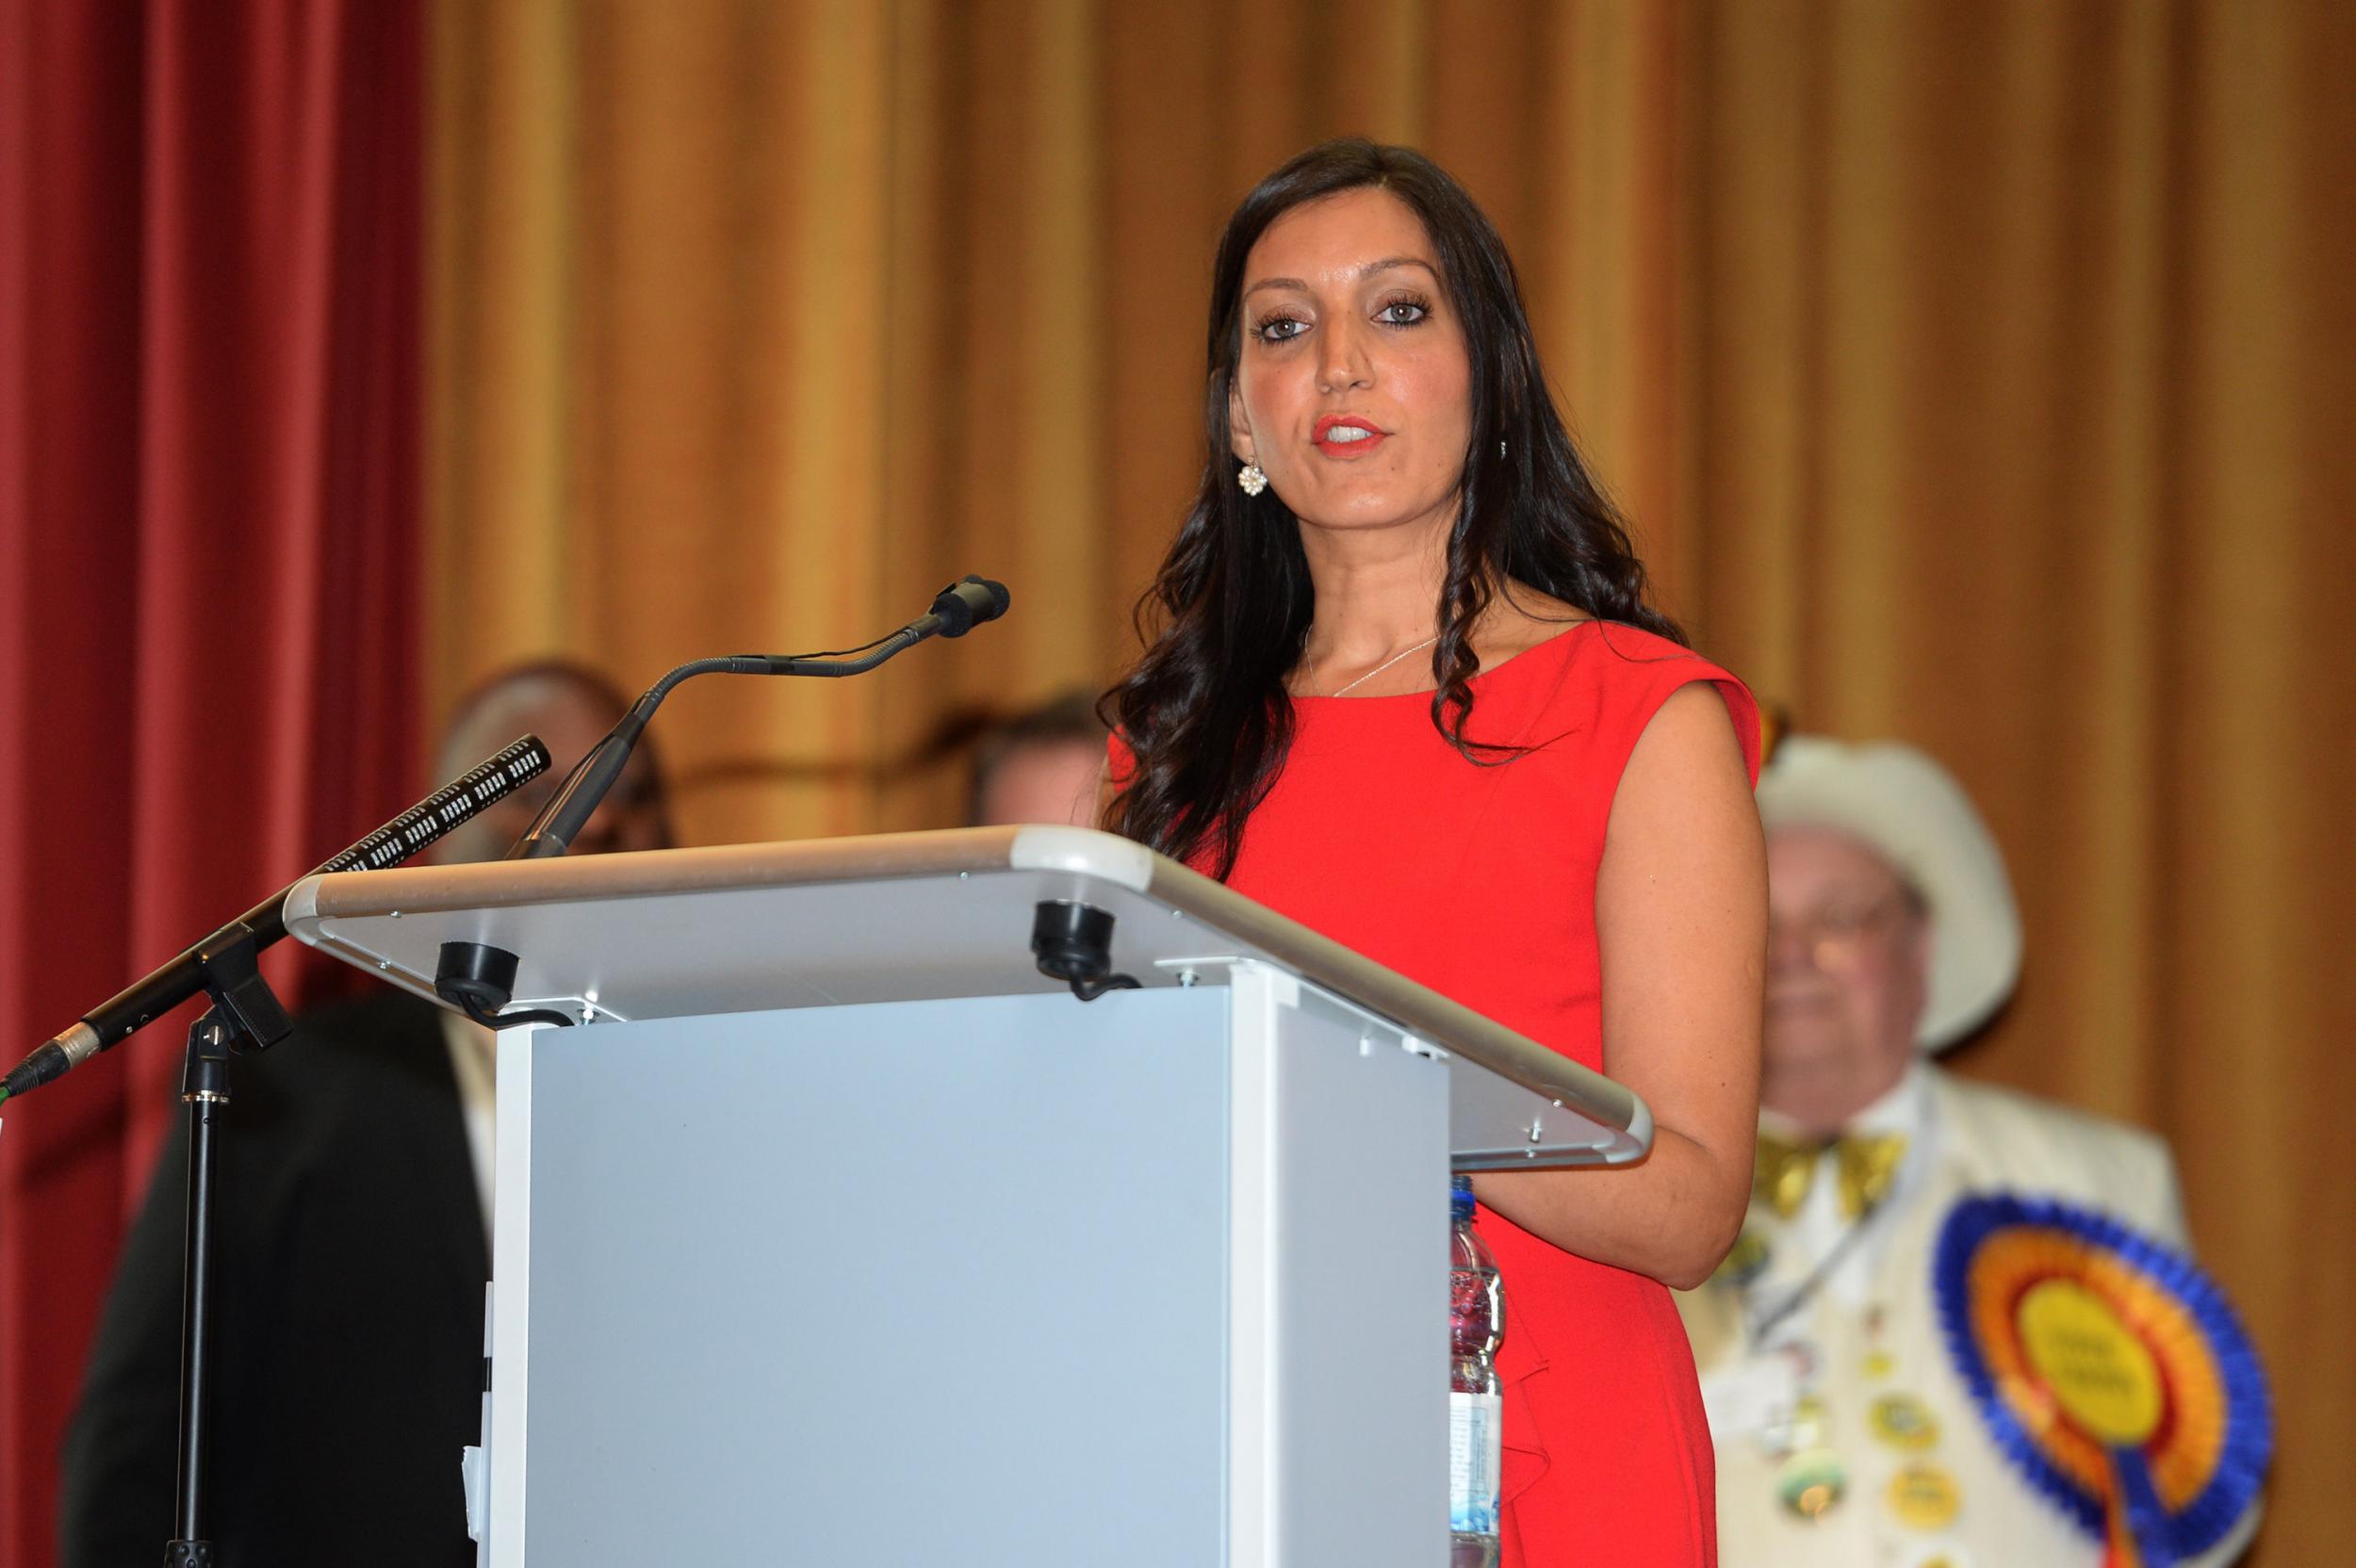 The Tooting MP said she had felt her career would be over if she spoke out